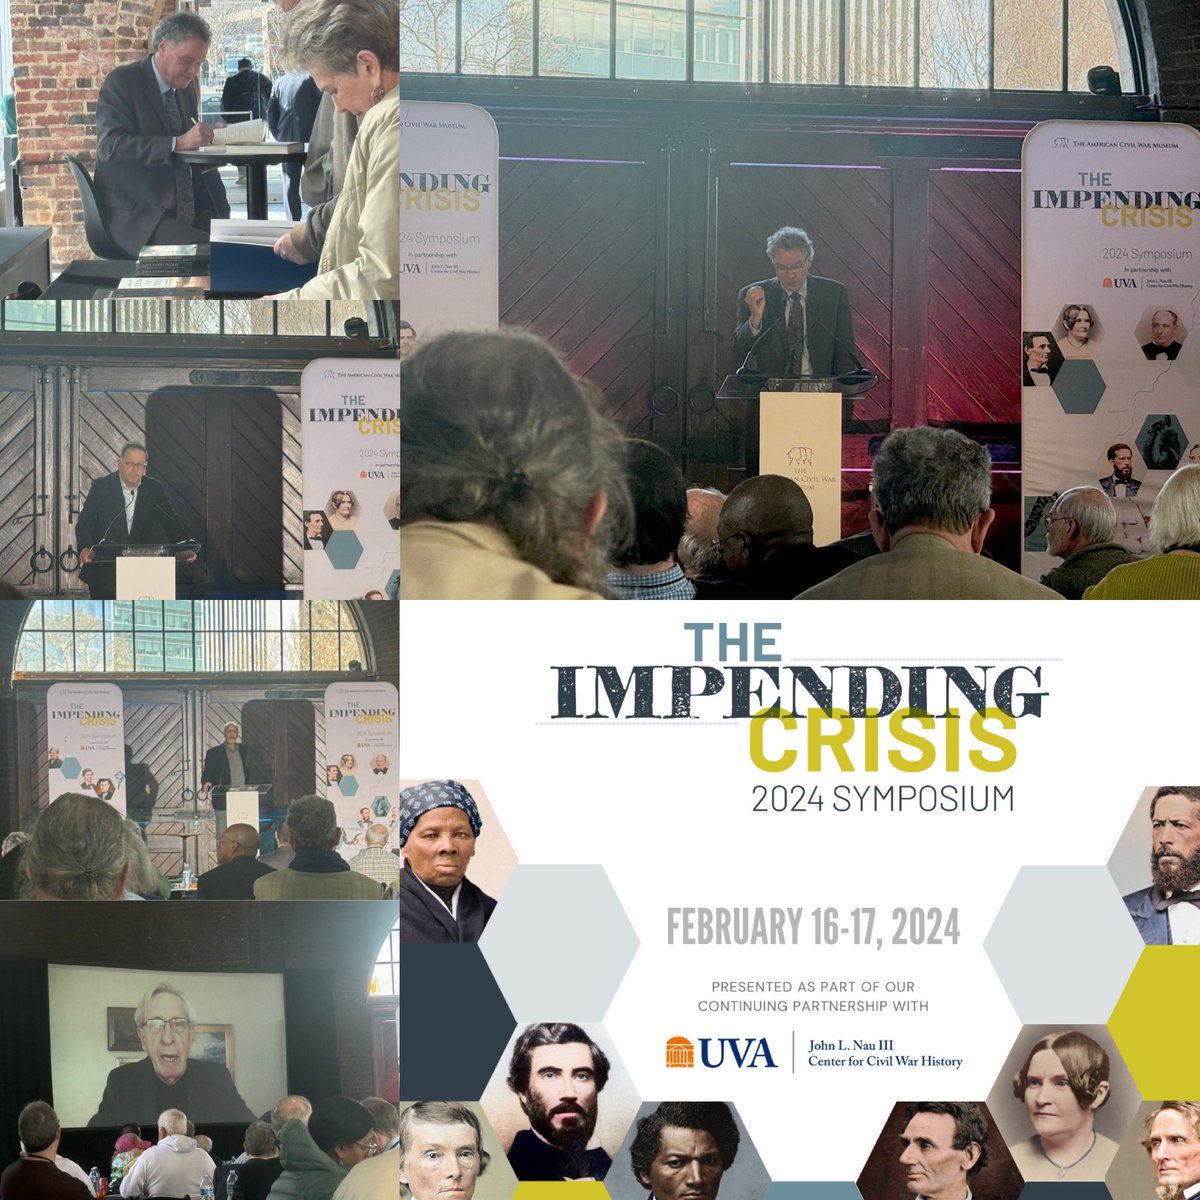 Much thanks to @ACWMuseum @NauCivilWar for sharing 2 days of scholarship & brilliant new exhibit #TheImpendingCrisis w/ @edward_l_ayers @aipsmith @askintoofew @carriejanney & Richard Blackett. We enjoyed sharing American Visions 📖📜🗺️👩🏻‍💻⛪️